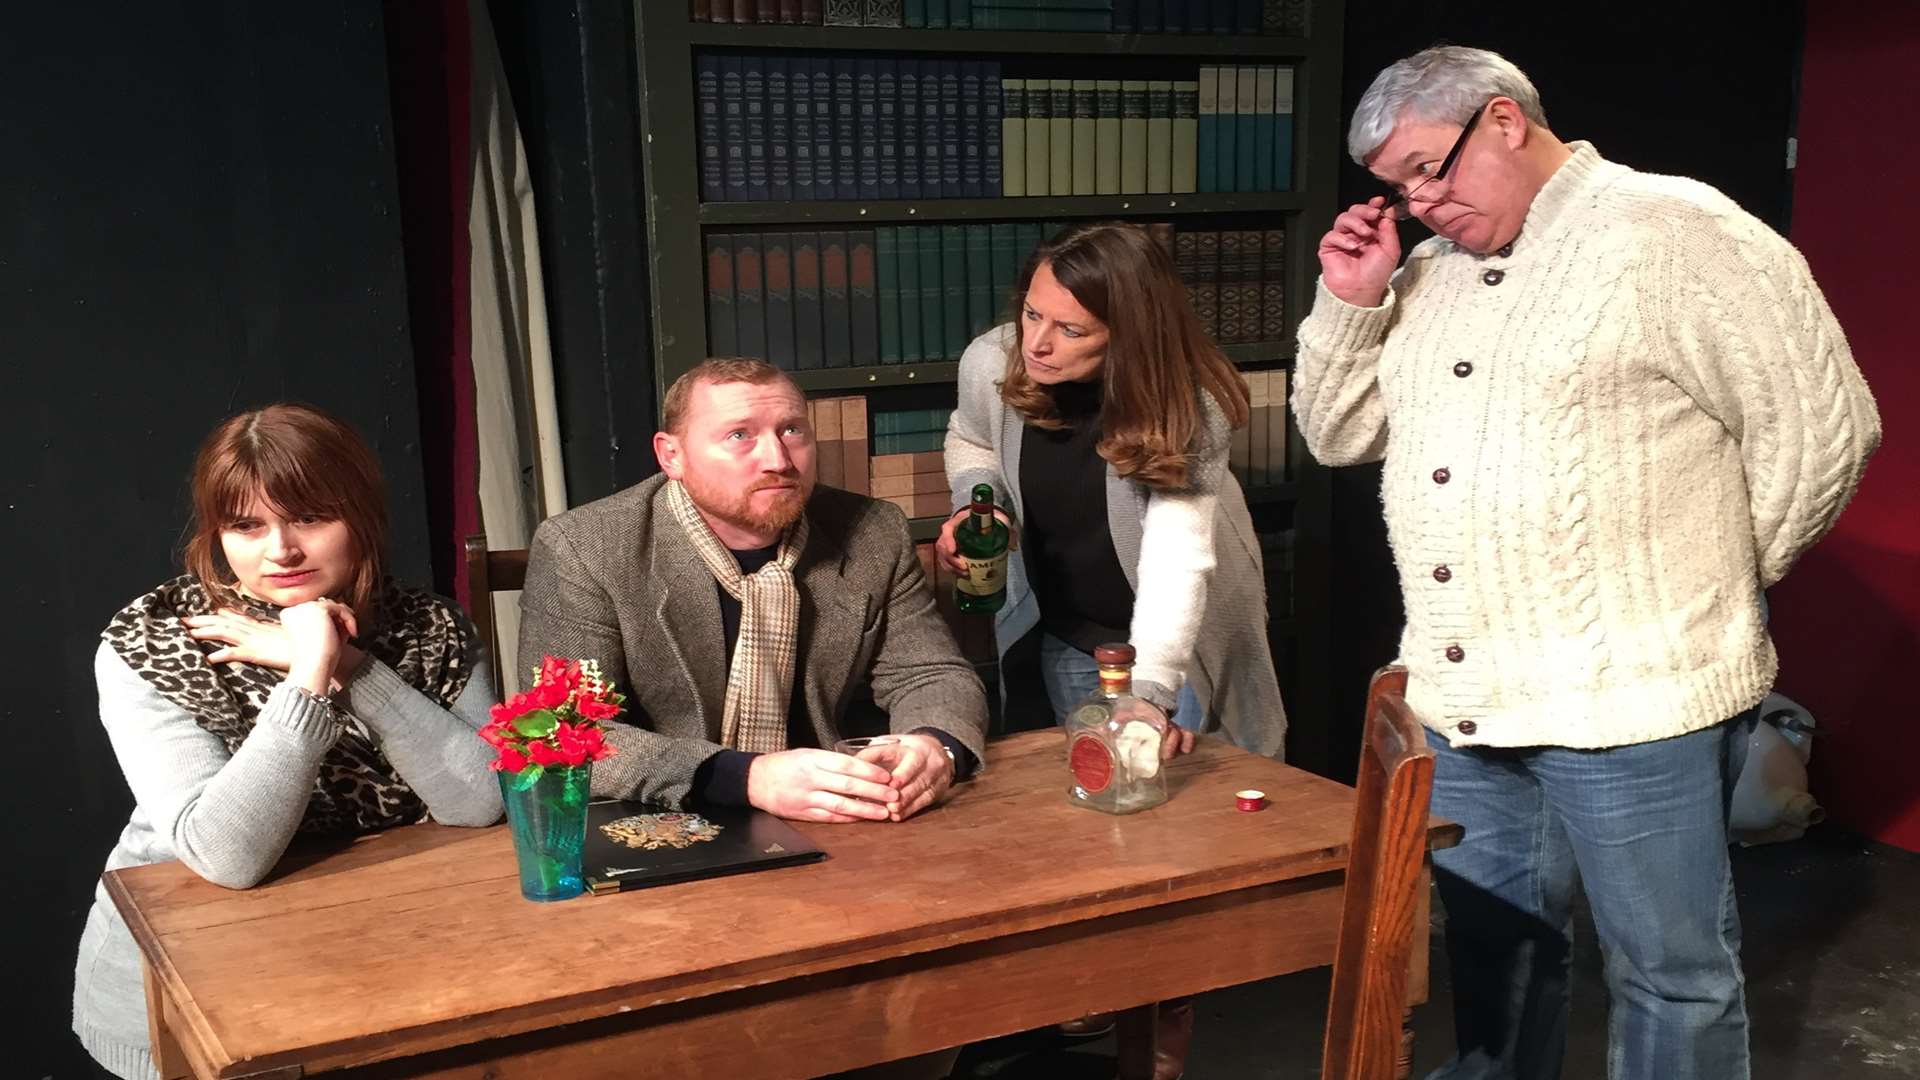 The comedy runs at the Rocheser High Street Theatre until Saturday, February 4